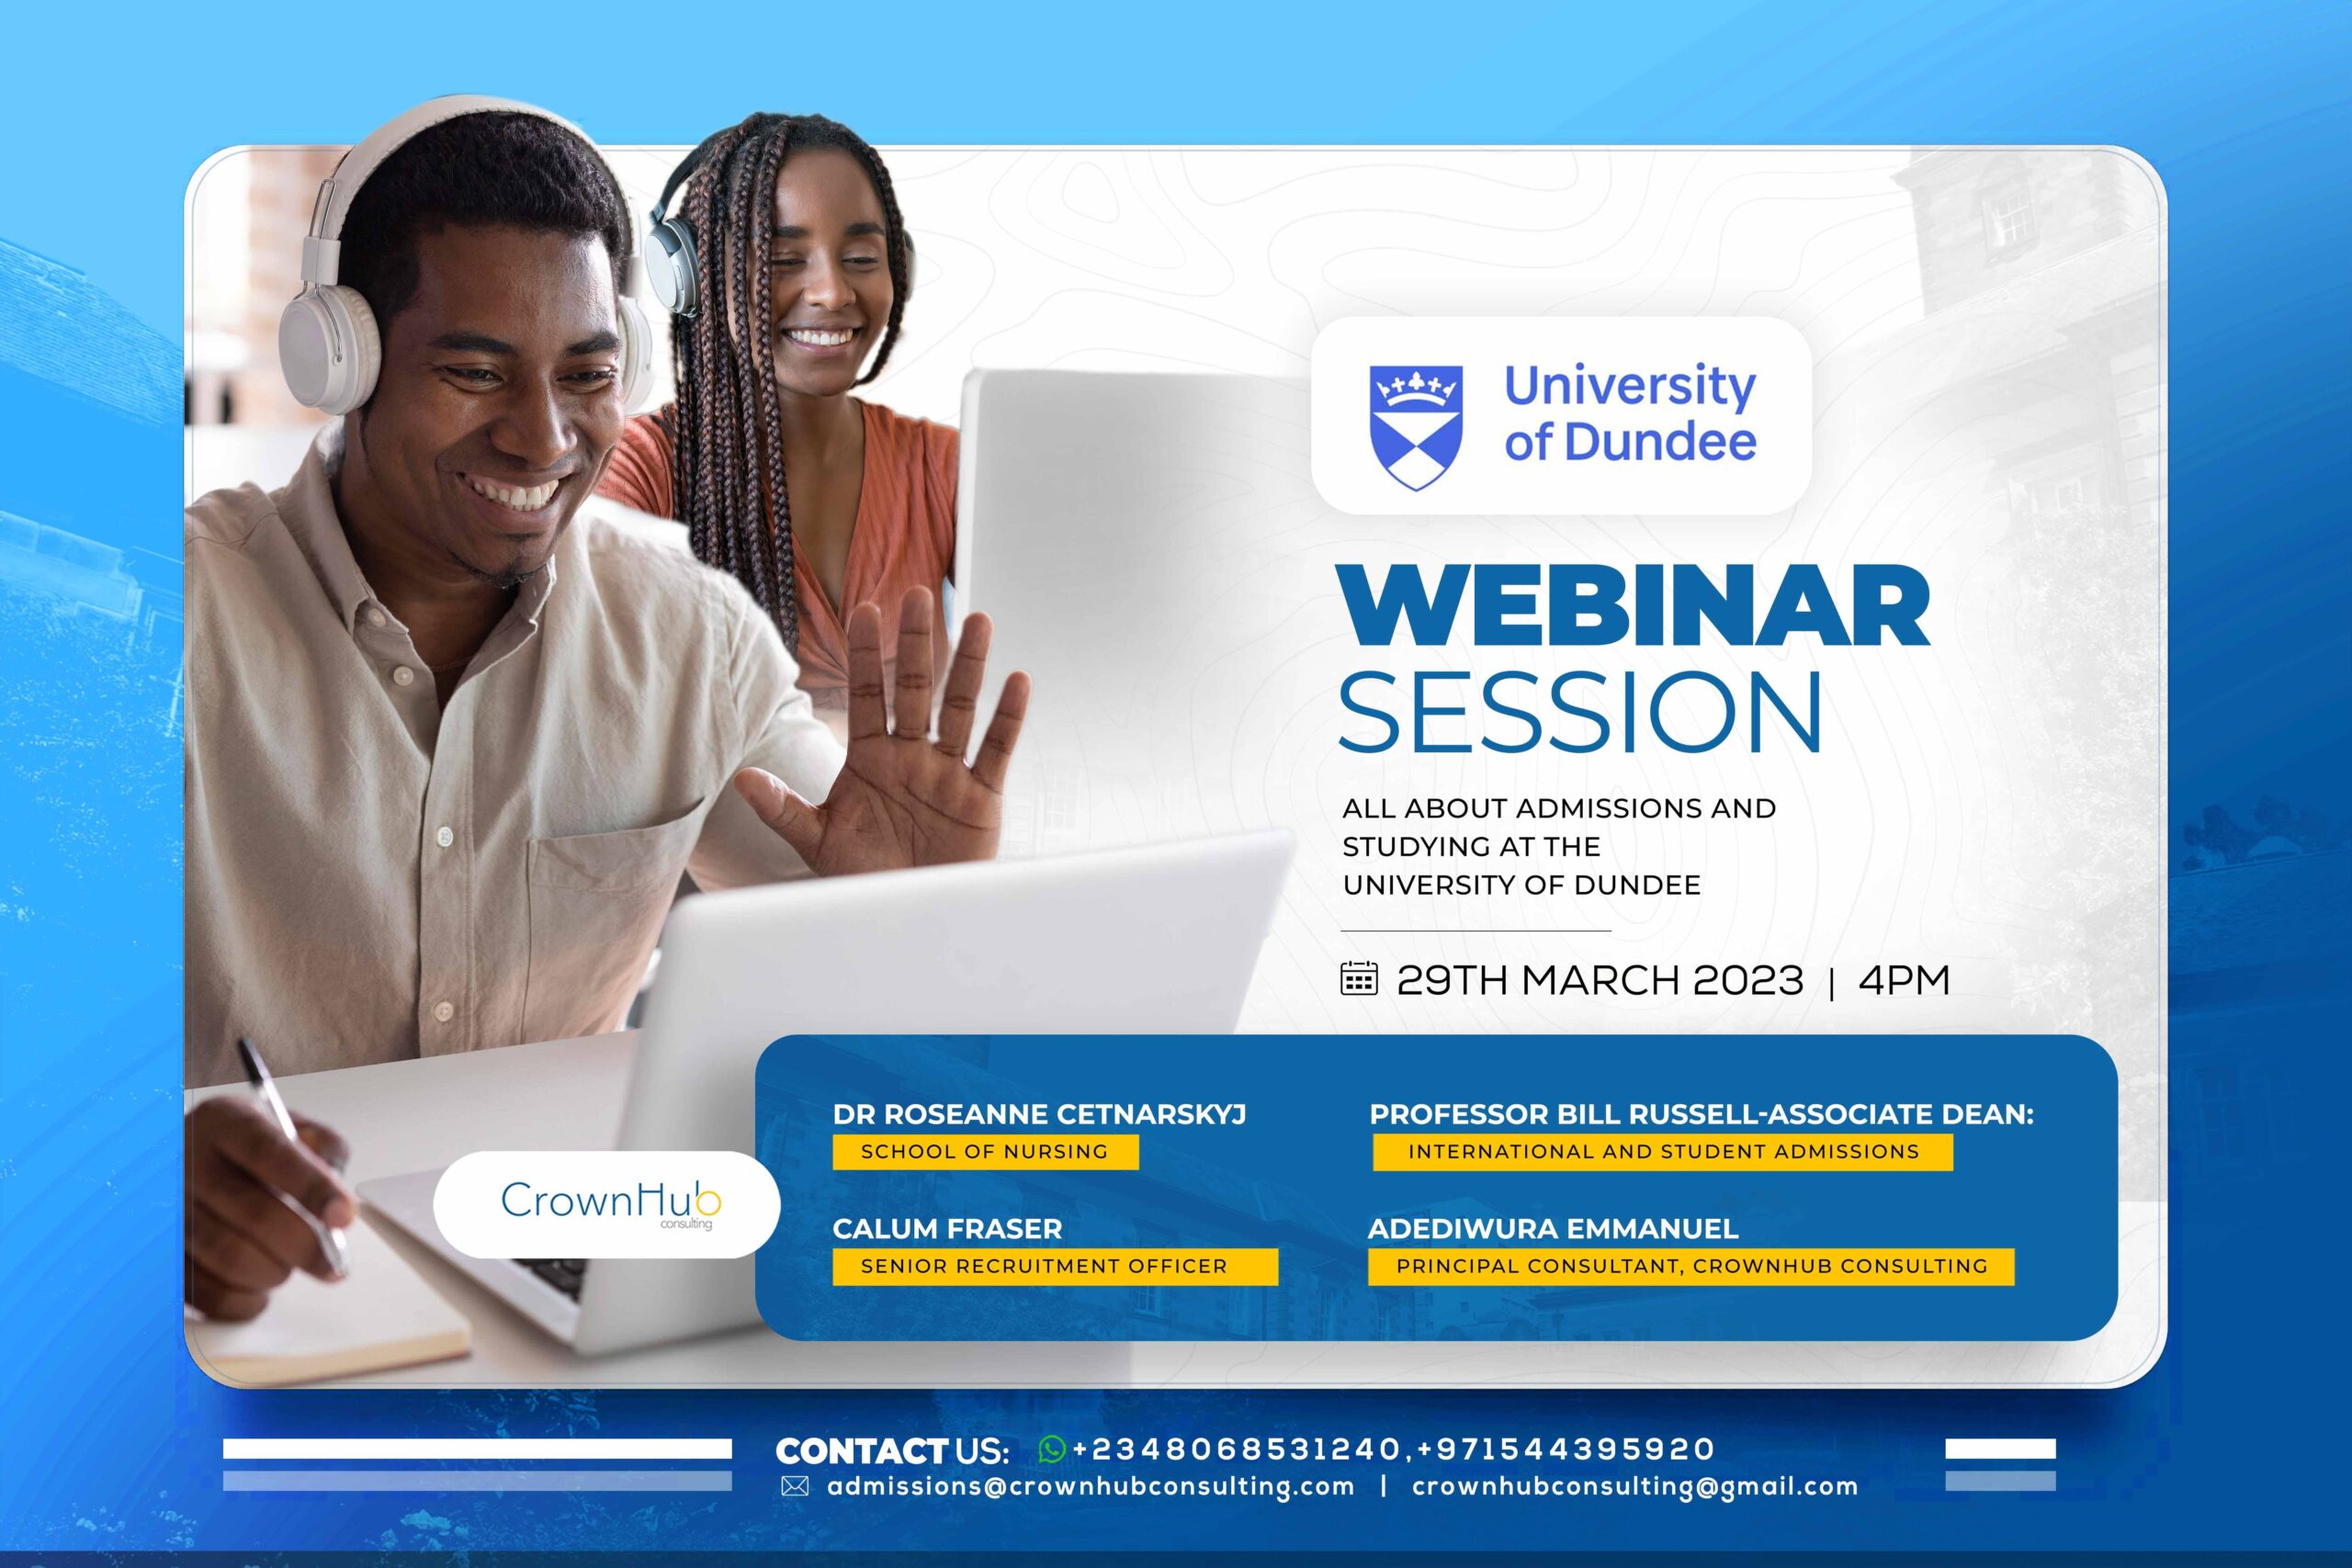 University of Dundee Webinar - 29th March 2023